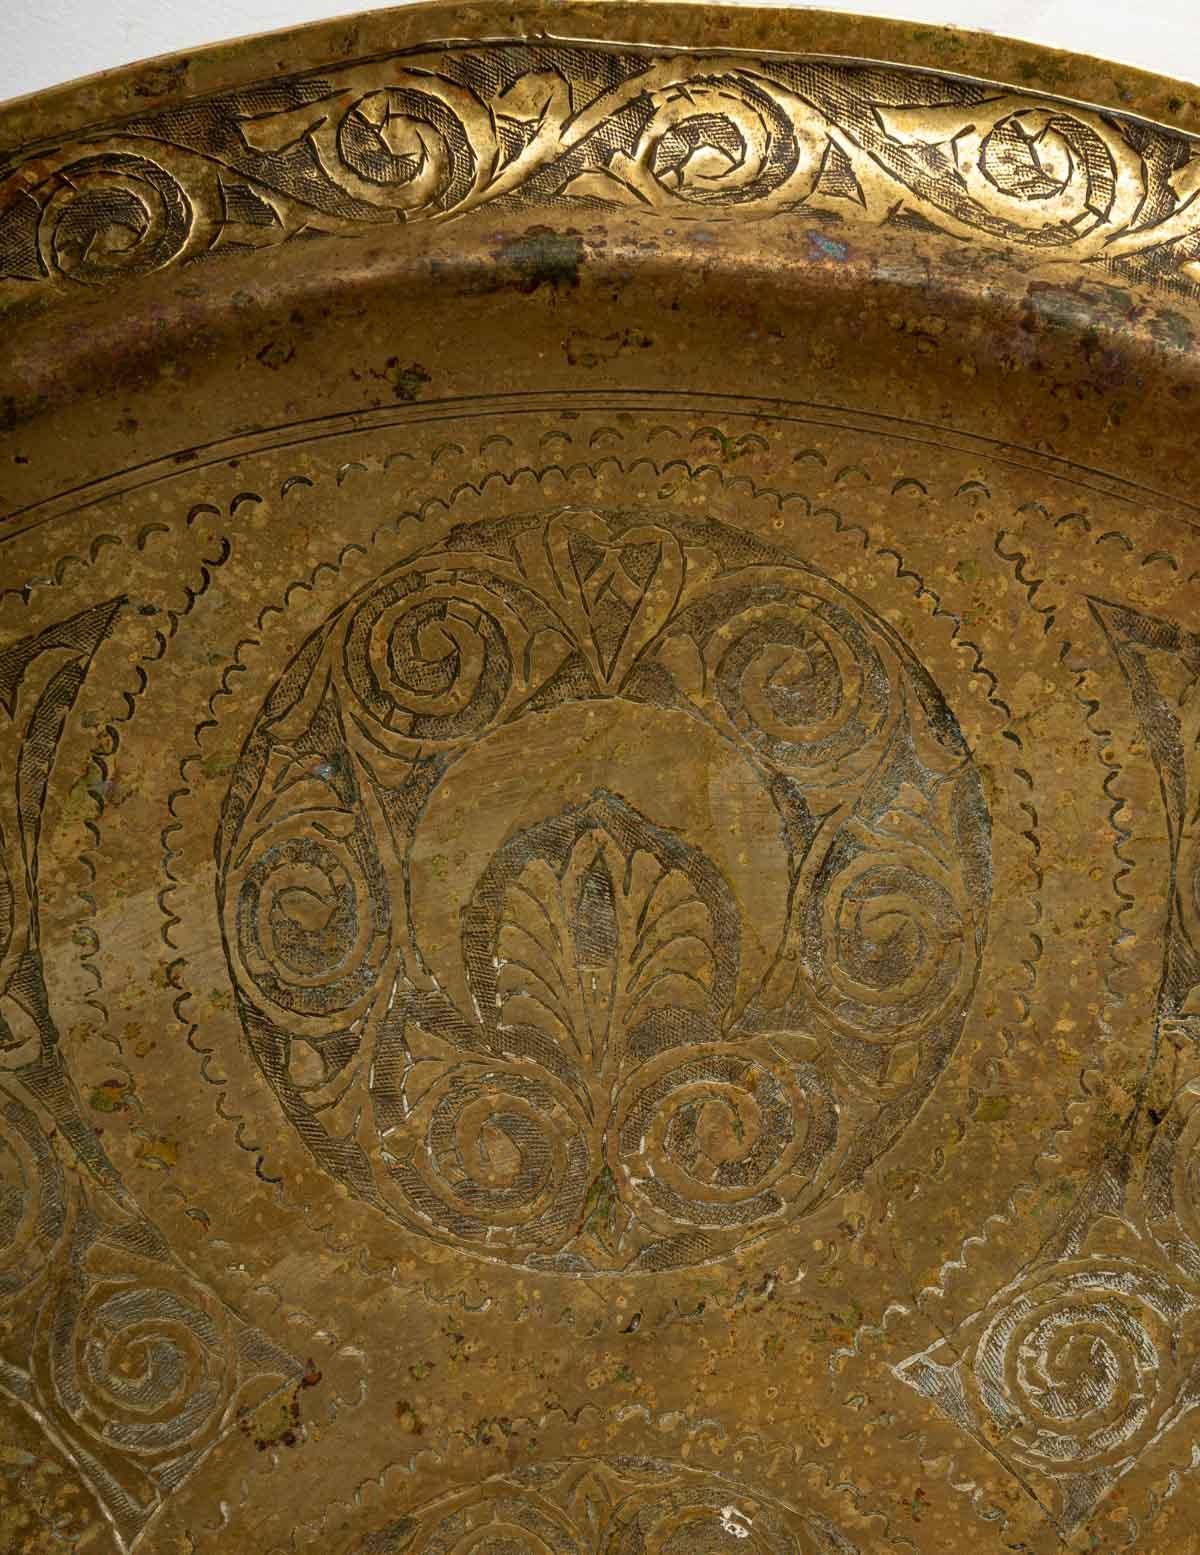 Syrian Antique Copper Tray For Sale